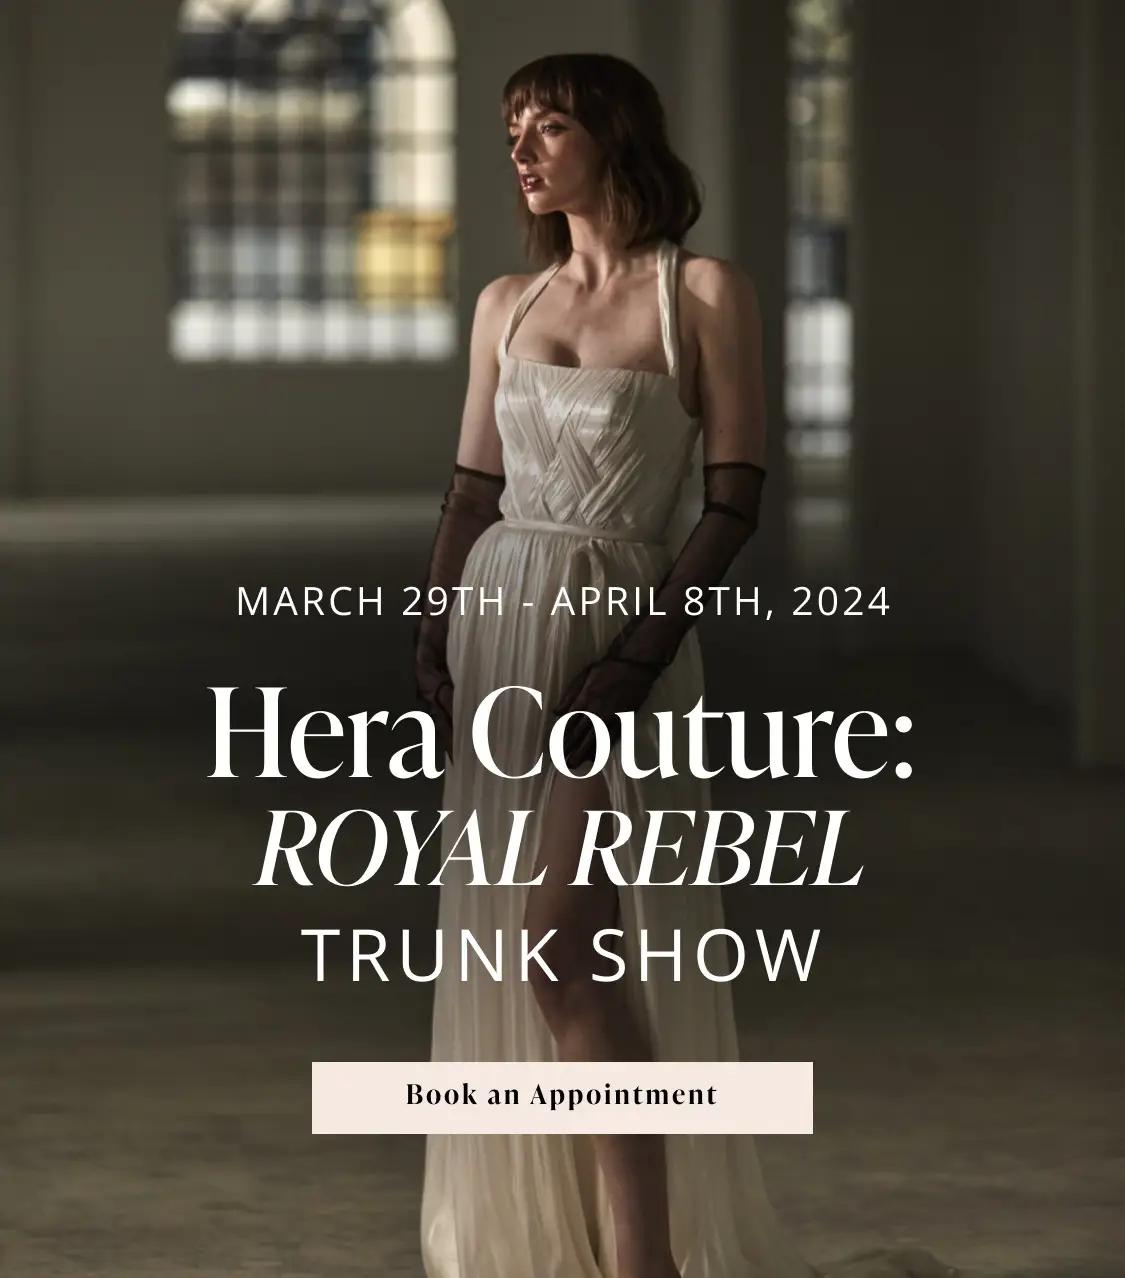 Hera Couture: Royal Rebel Trunk Show Banner Mobile